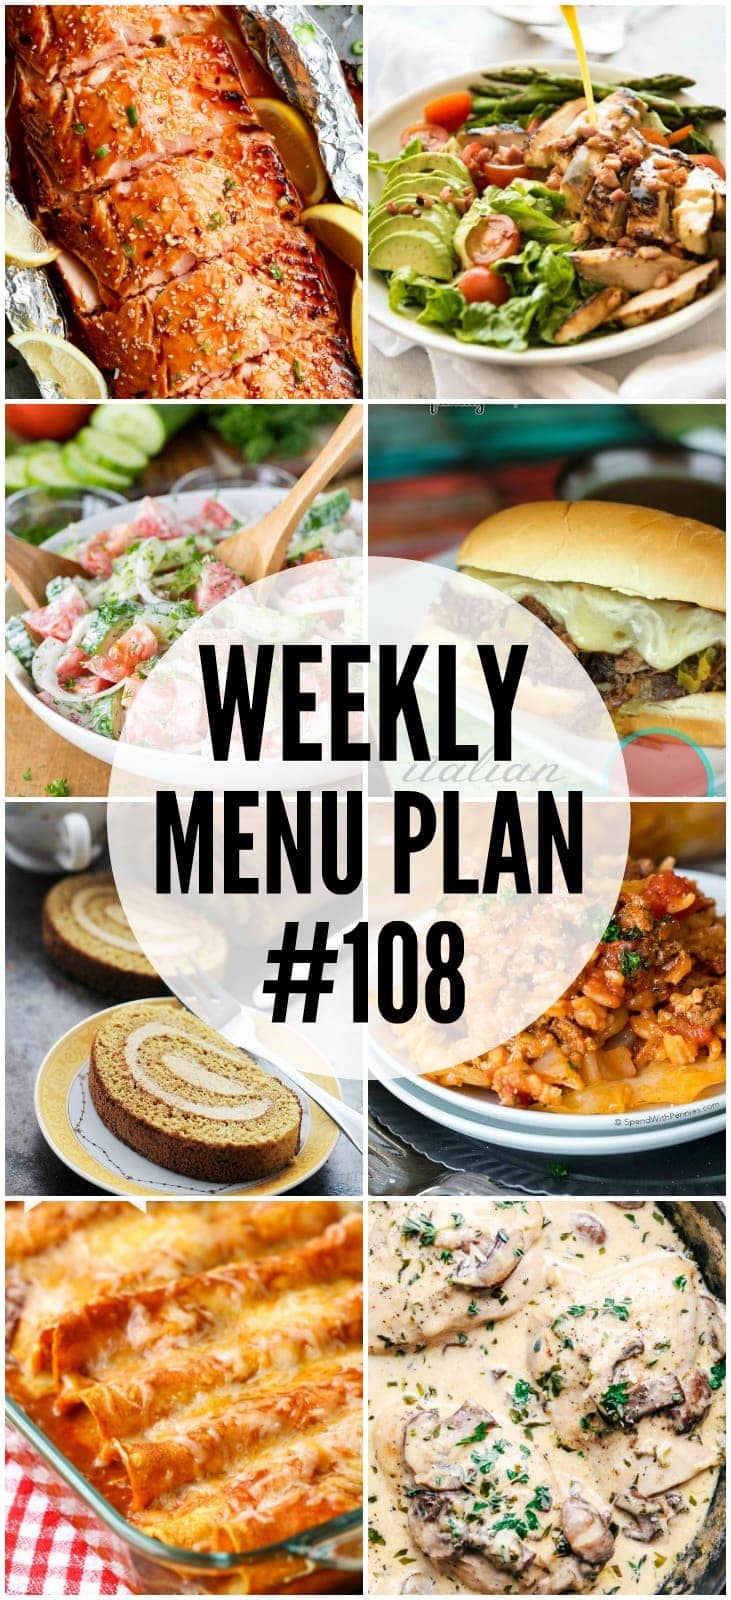 Weekly Menu Plan (#108) - Seven talented bloggers bringing you a full week of recipes including dinner, sides dishes, and desserts!